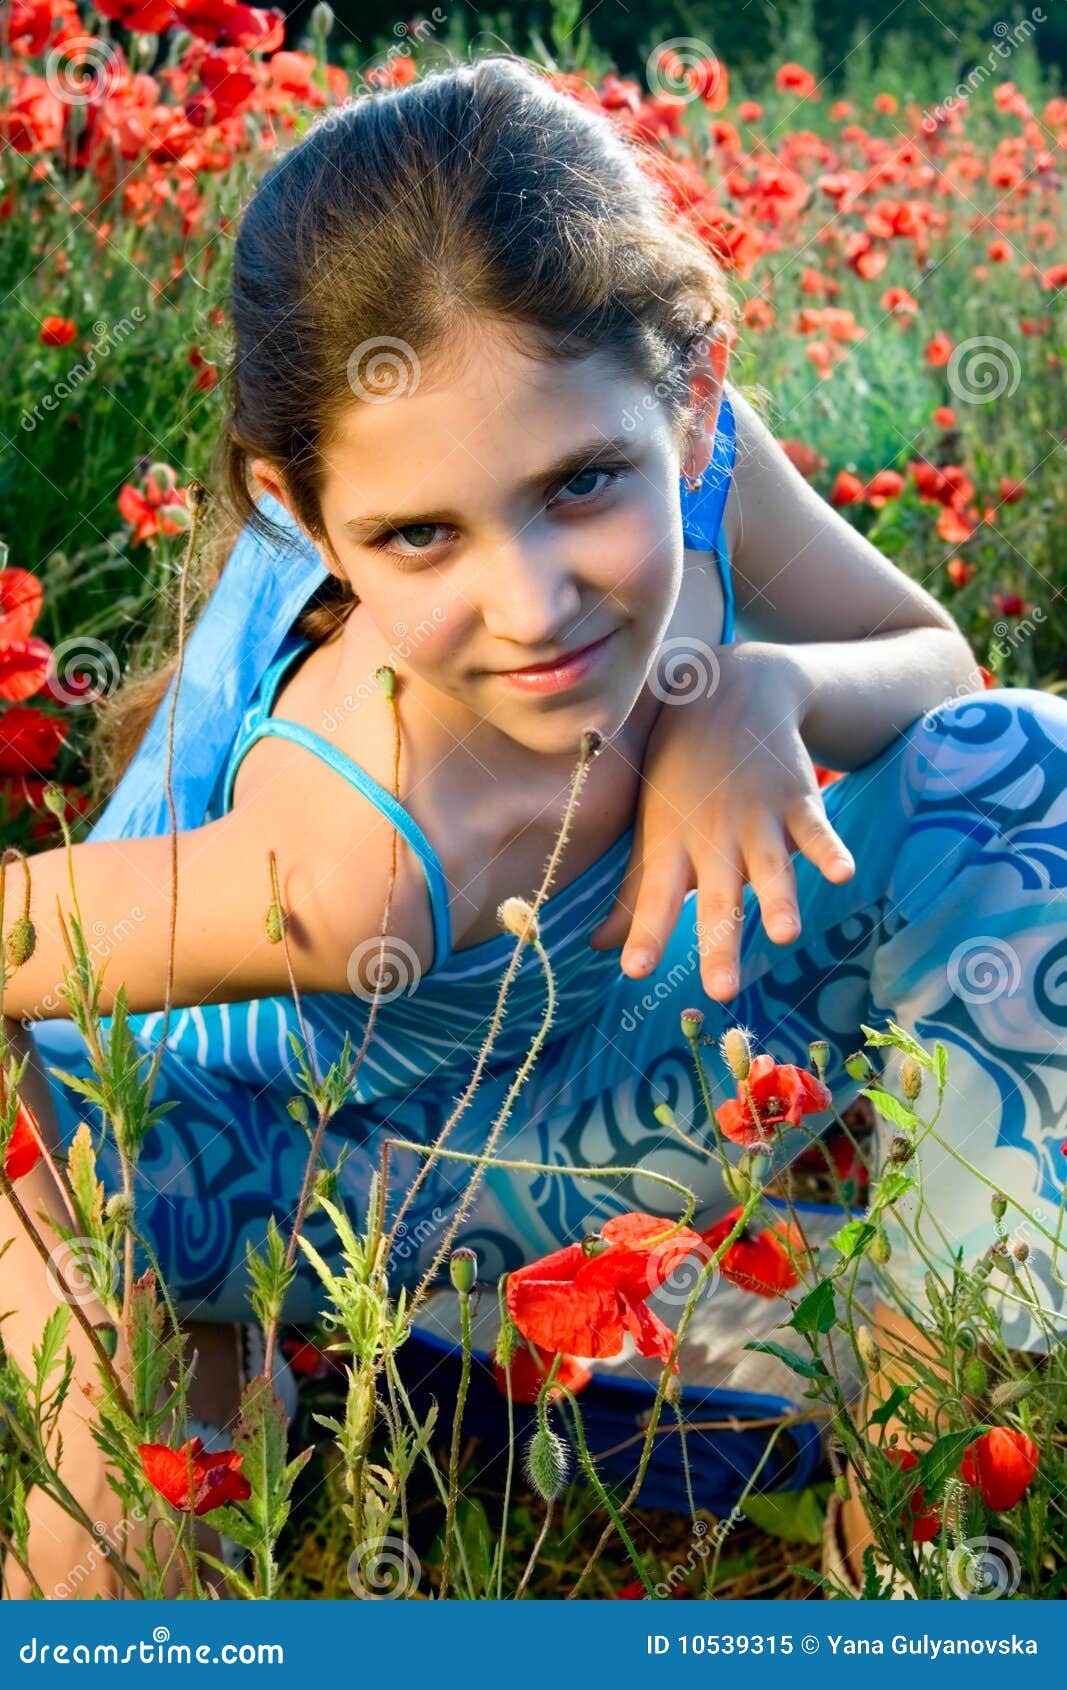 Royalty free photograph of young girl with fair light skin 